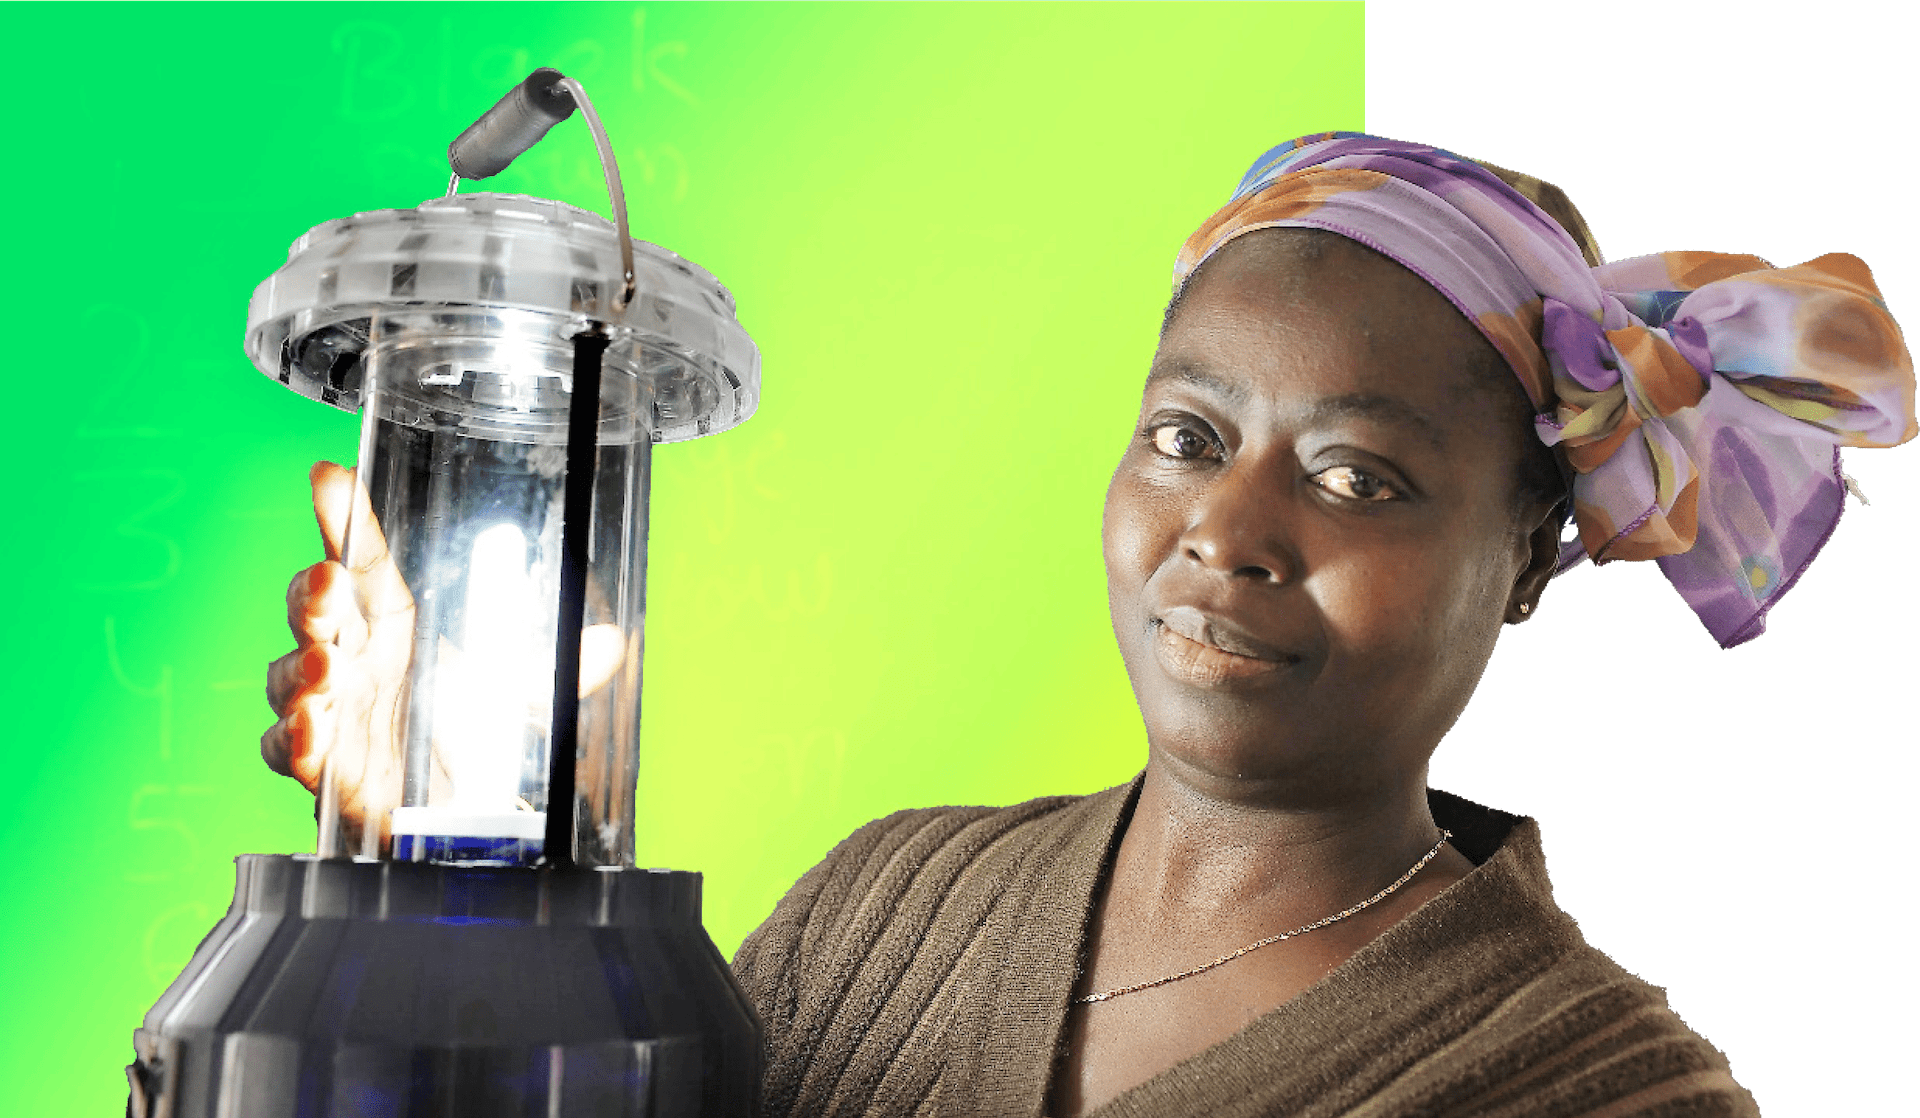 woman from Togo holding up a lamp